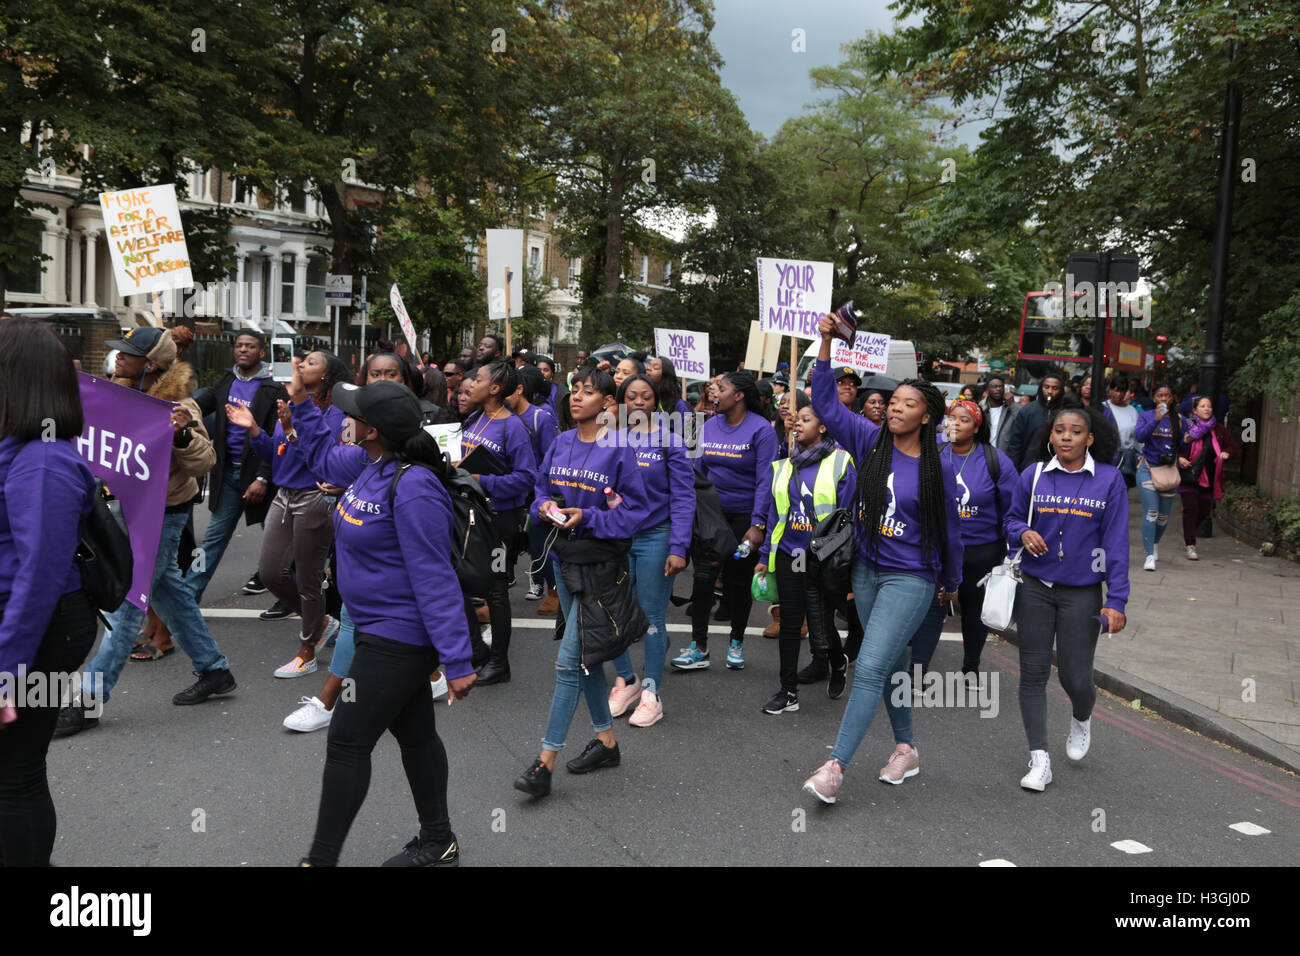 London, UK. 8th Oct, 2016. Wailing Mothers a campaign group to empower mothers and families in understanding the nature of youth violence marched from Brixton to Tulse Hill denouncing knife and Gun crime. Credit:  Thabo Jaiyesimi/Alamy Live News Stock Photo